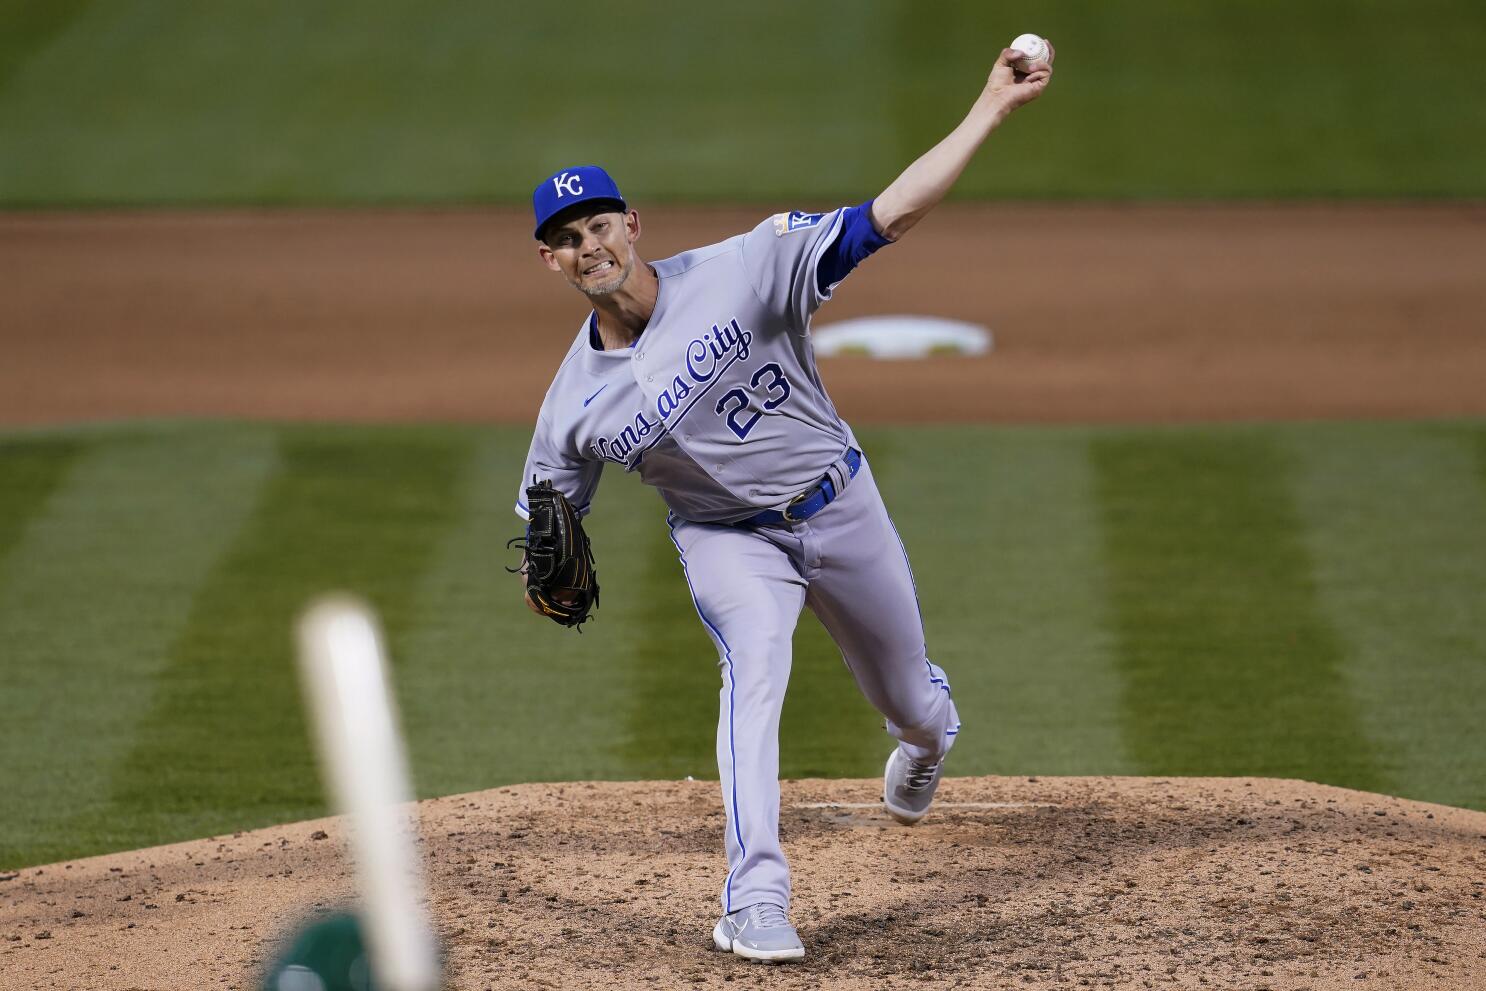 Singer pitches into sixth, Royals beat Rockies to avoid sweep